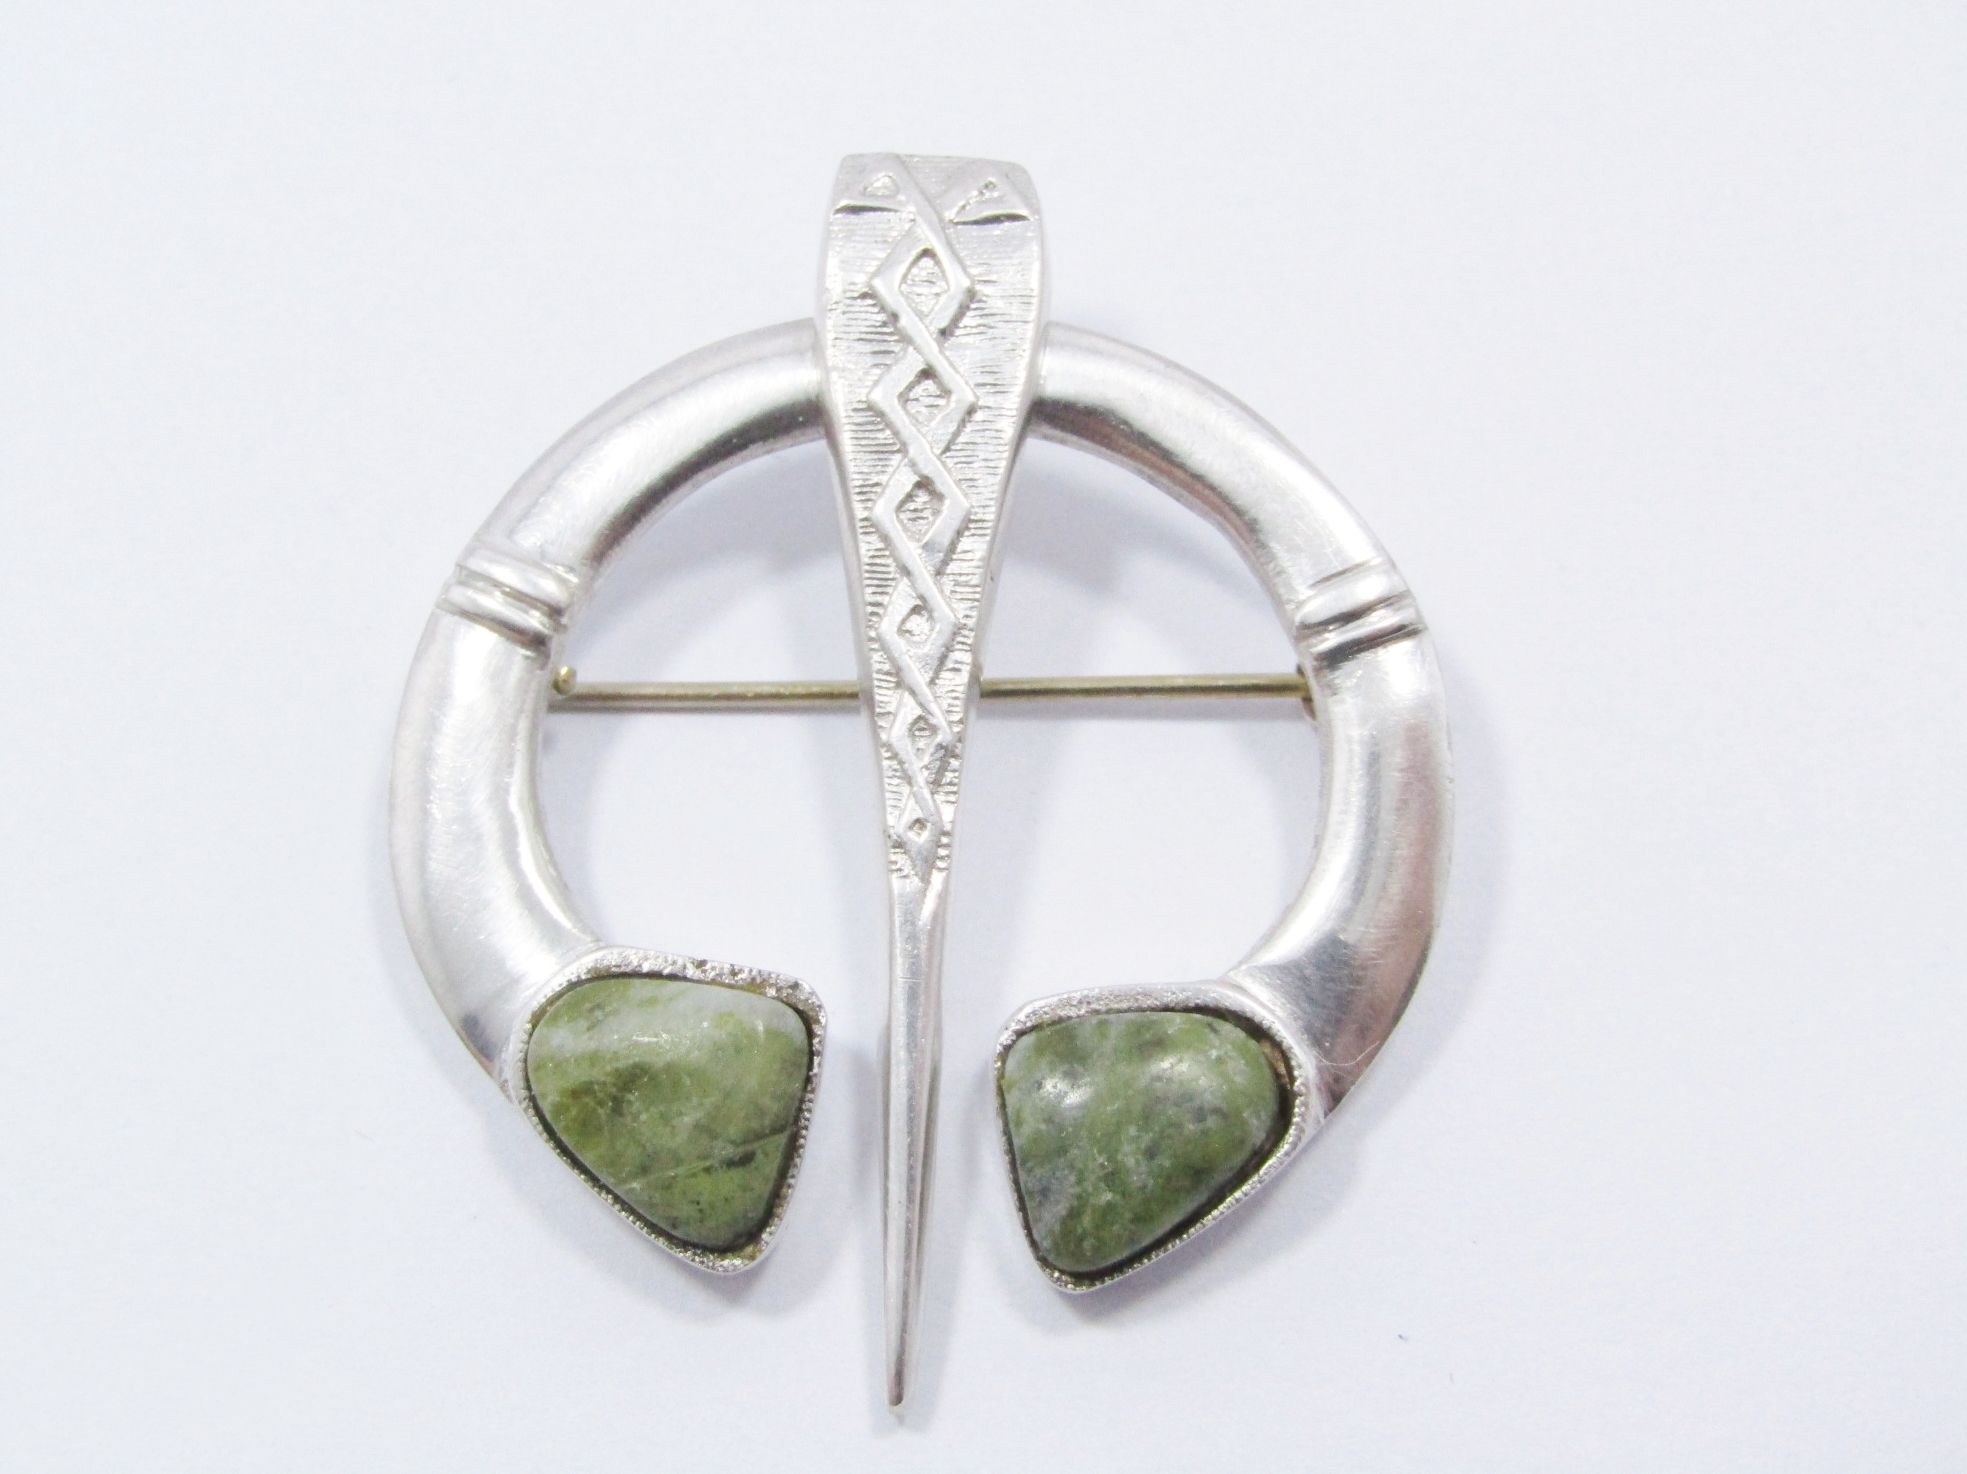 A Gorgeous Irish Tara Brooch pin With a Marble Stone inlay in Sterling Silver.